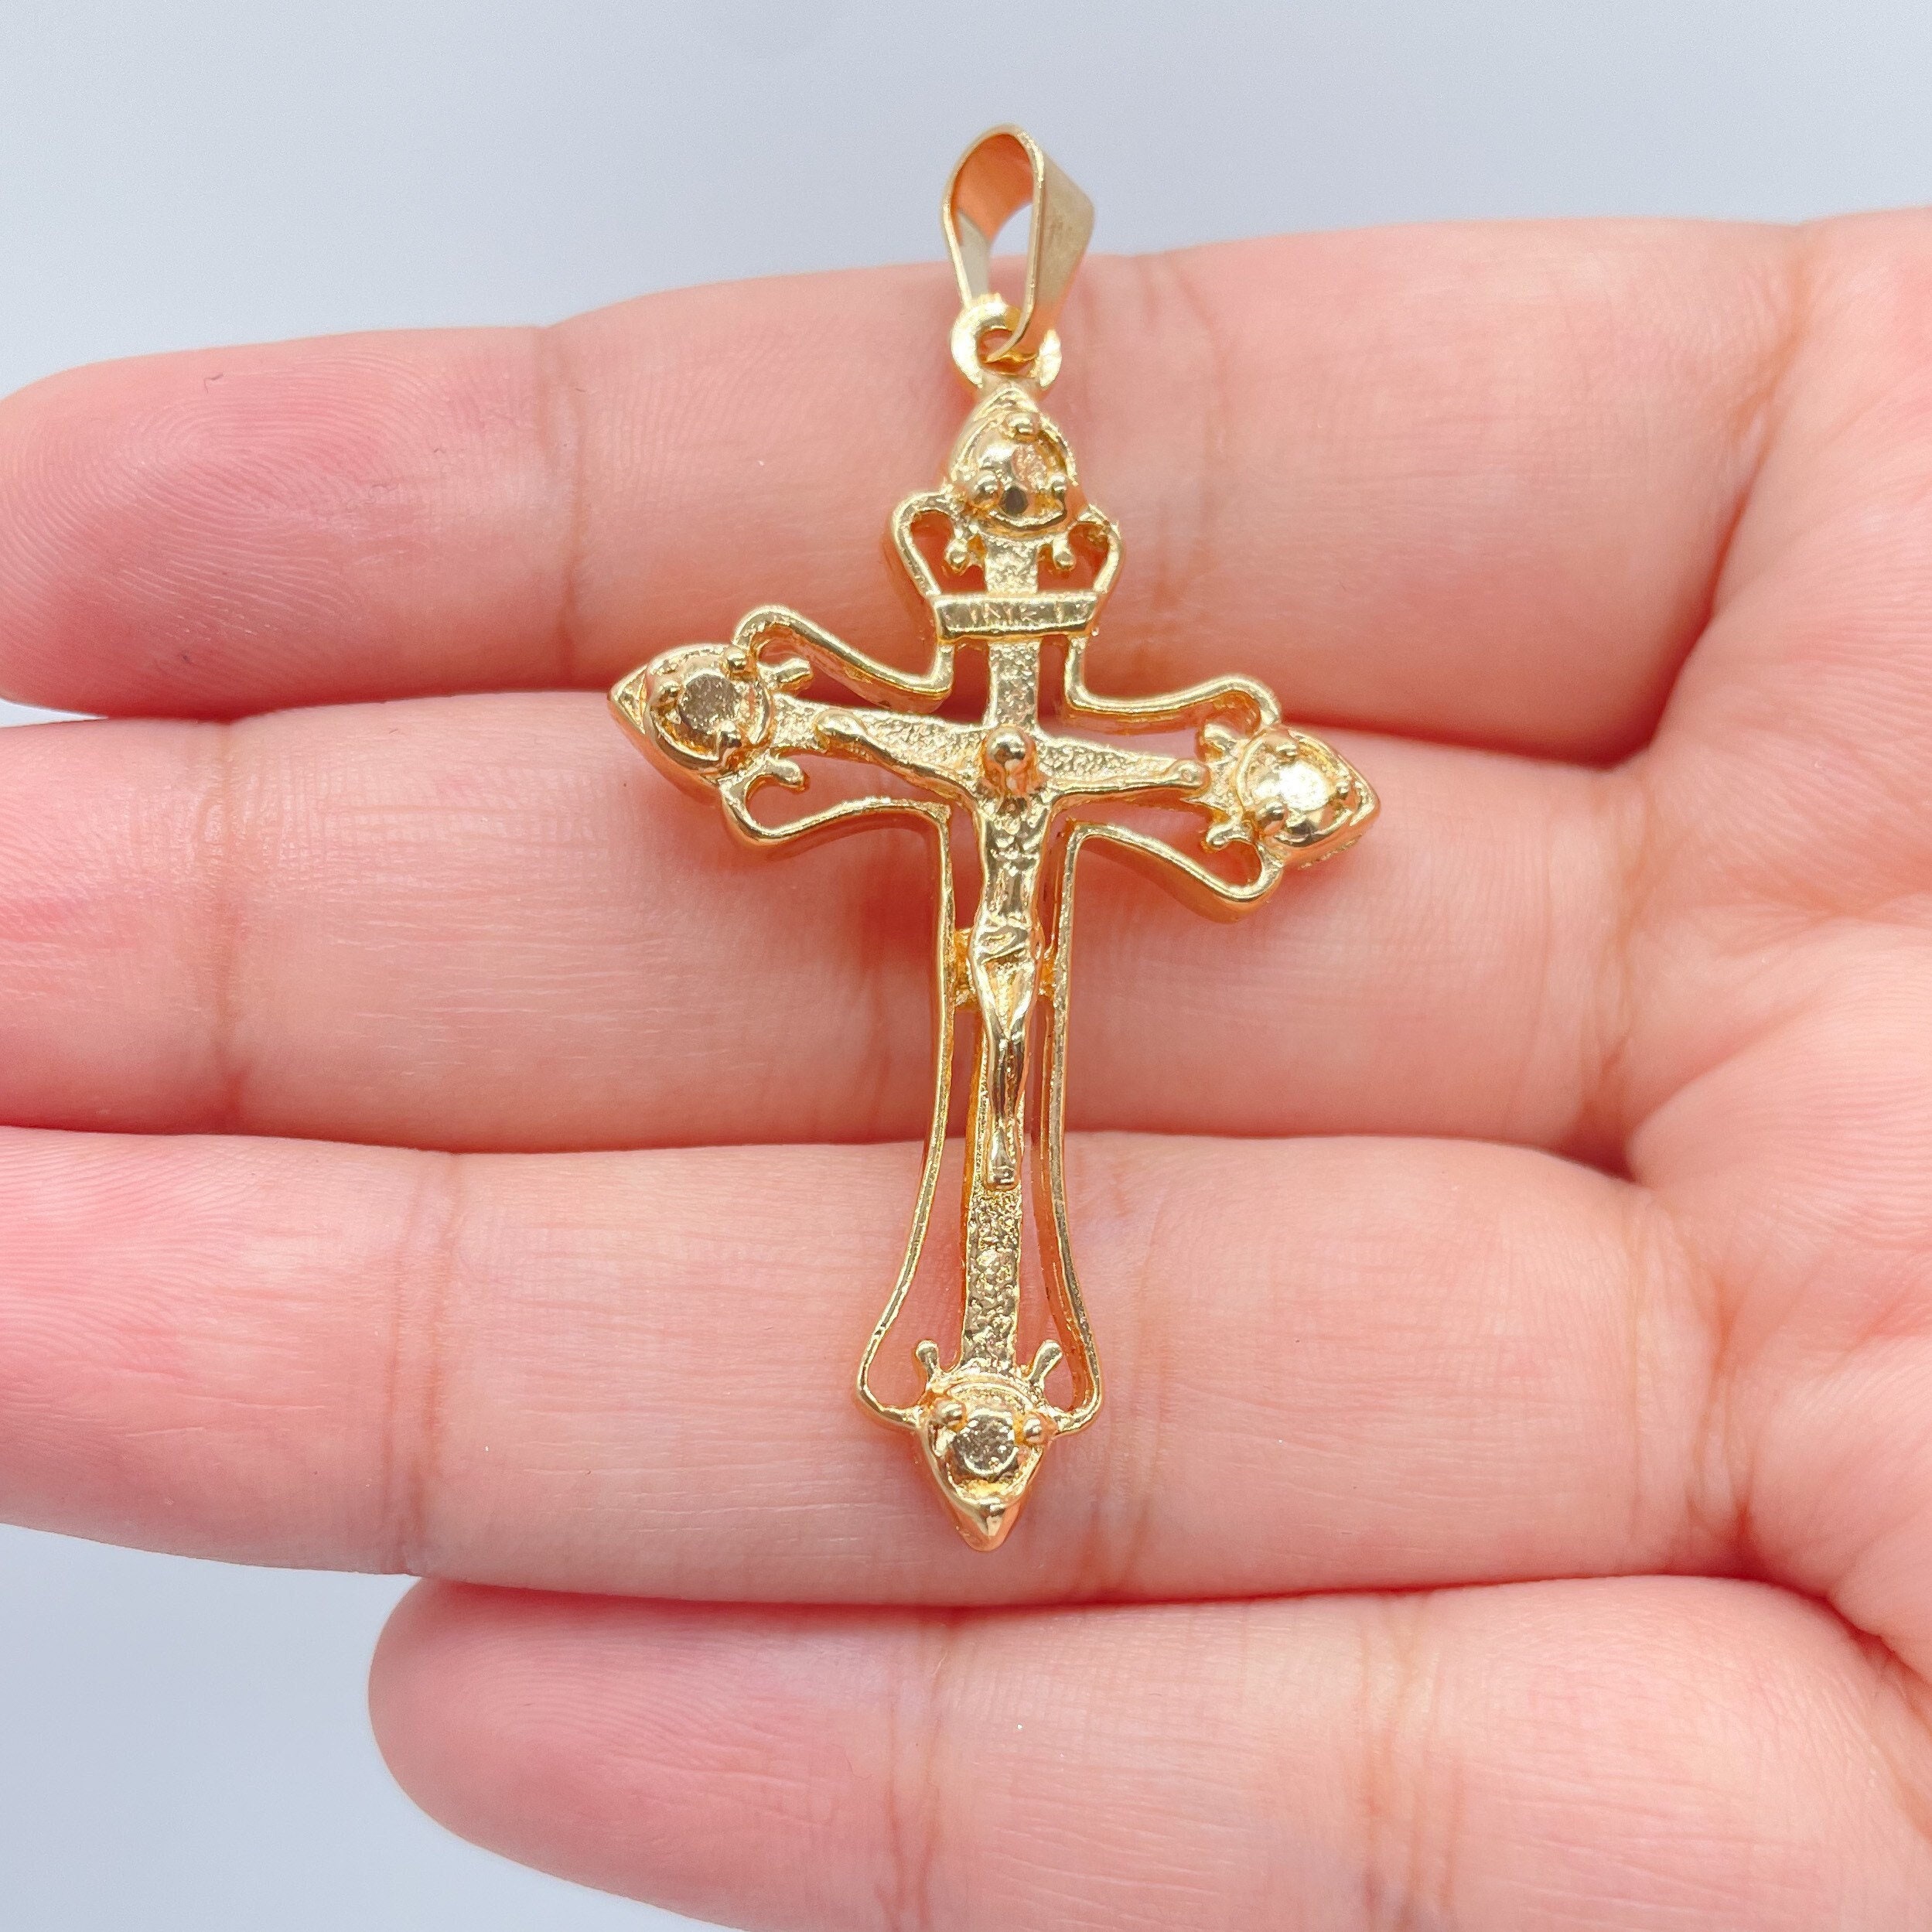 18k Gold Filled 1.7 Crucifix Cross Pendant Charm With Christ - Etsy